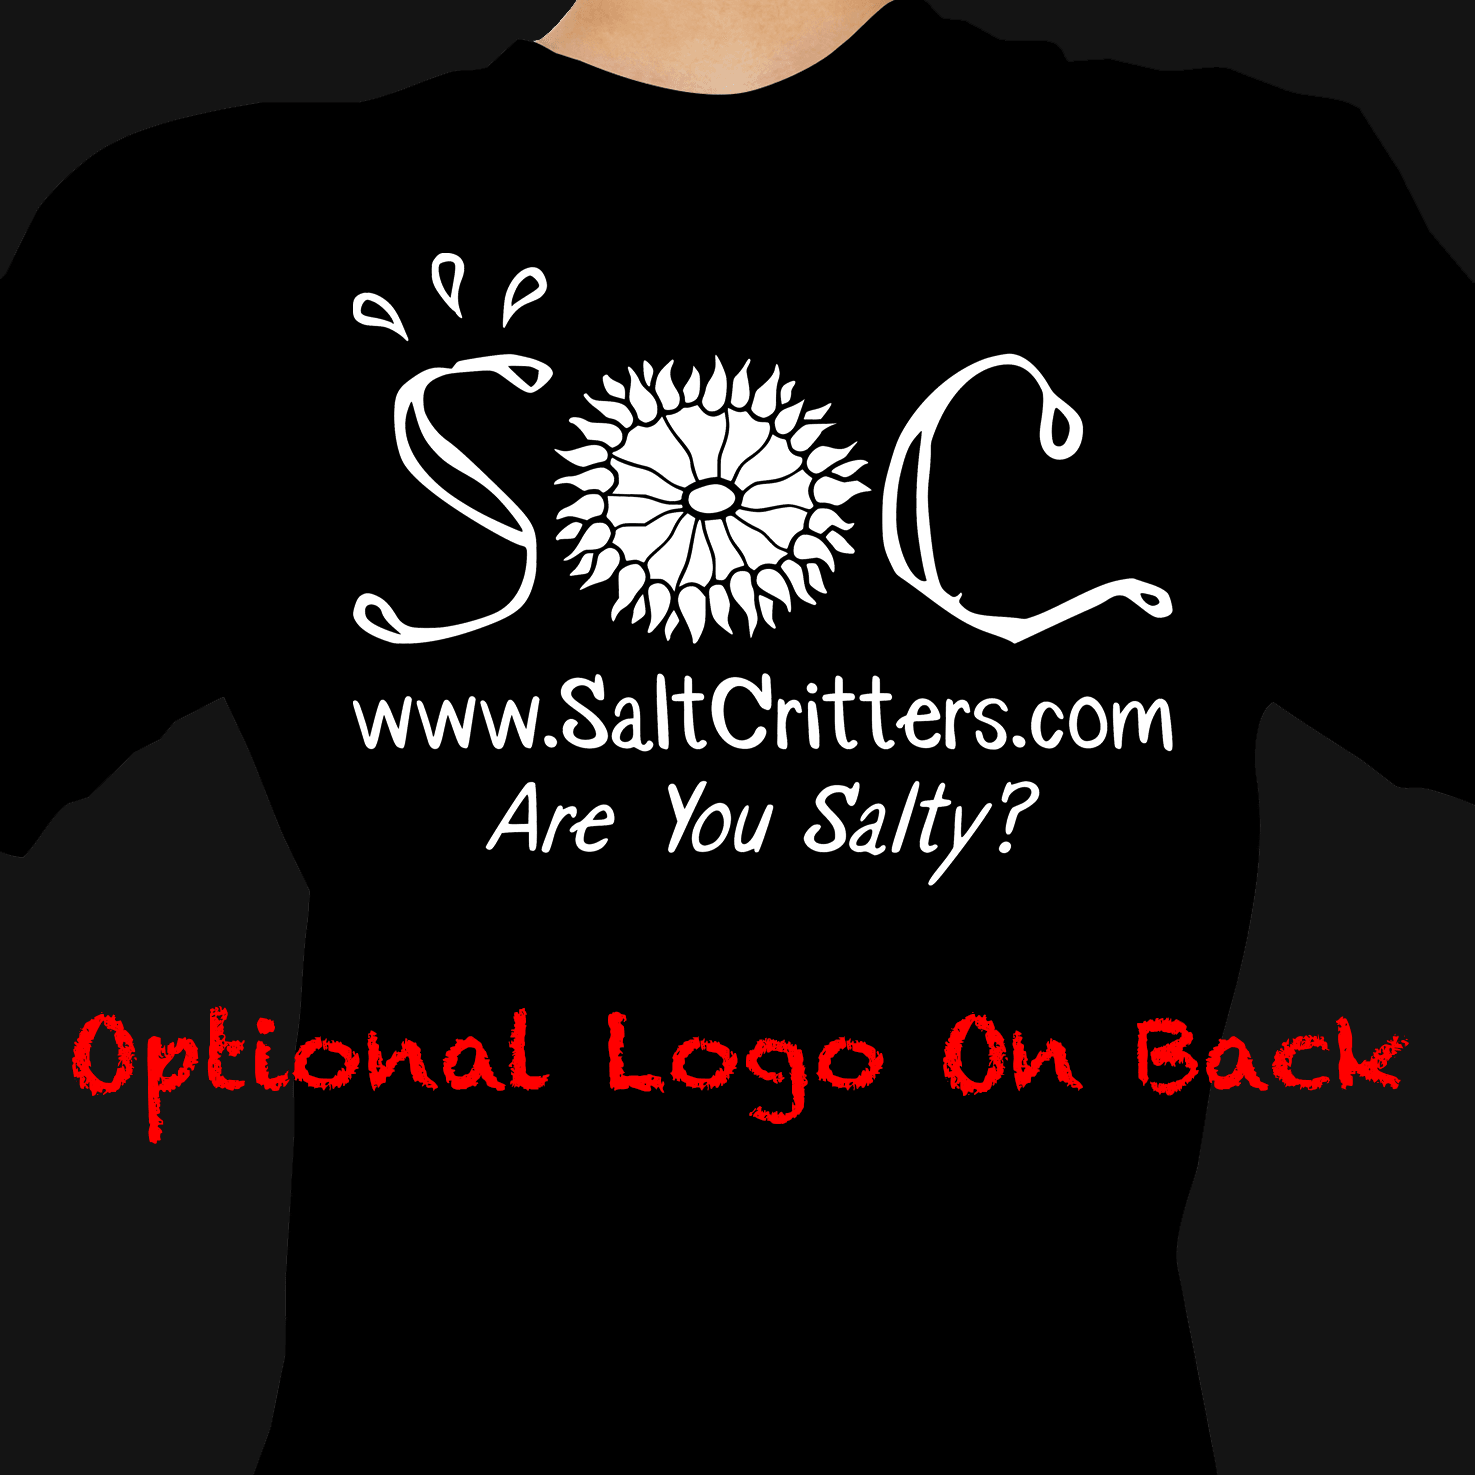 I'm Buying More Coral T-Shirt Dark Grey - SaltCritters